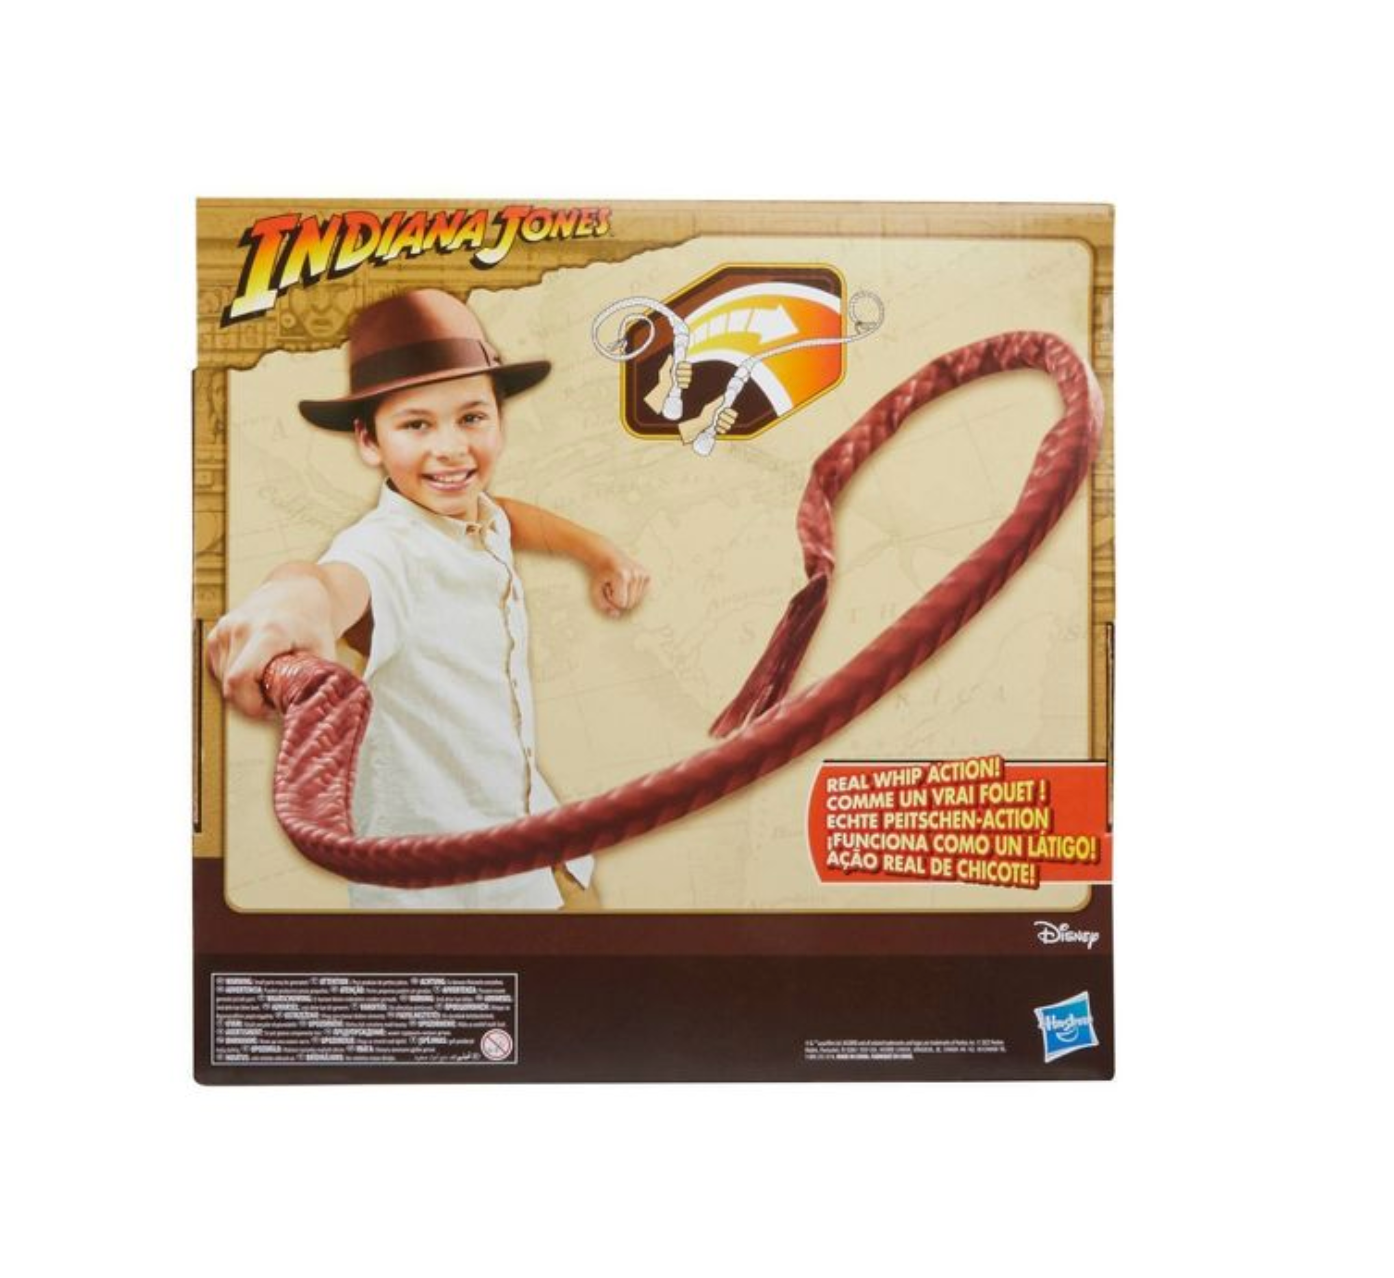 Disney Indiana Jones Action-Crackin' Whip Toy Snap & Retract action New with Box